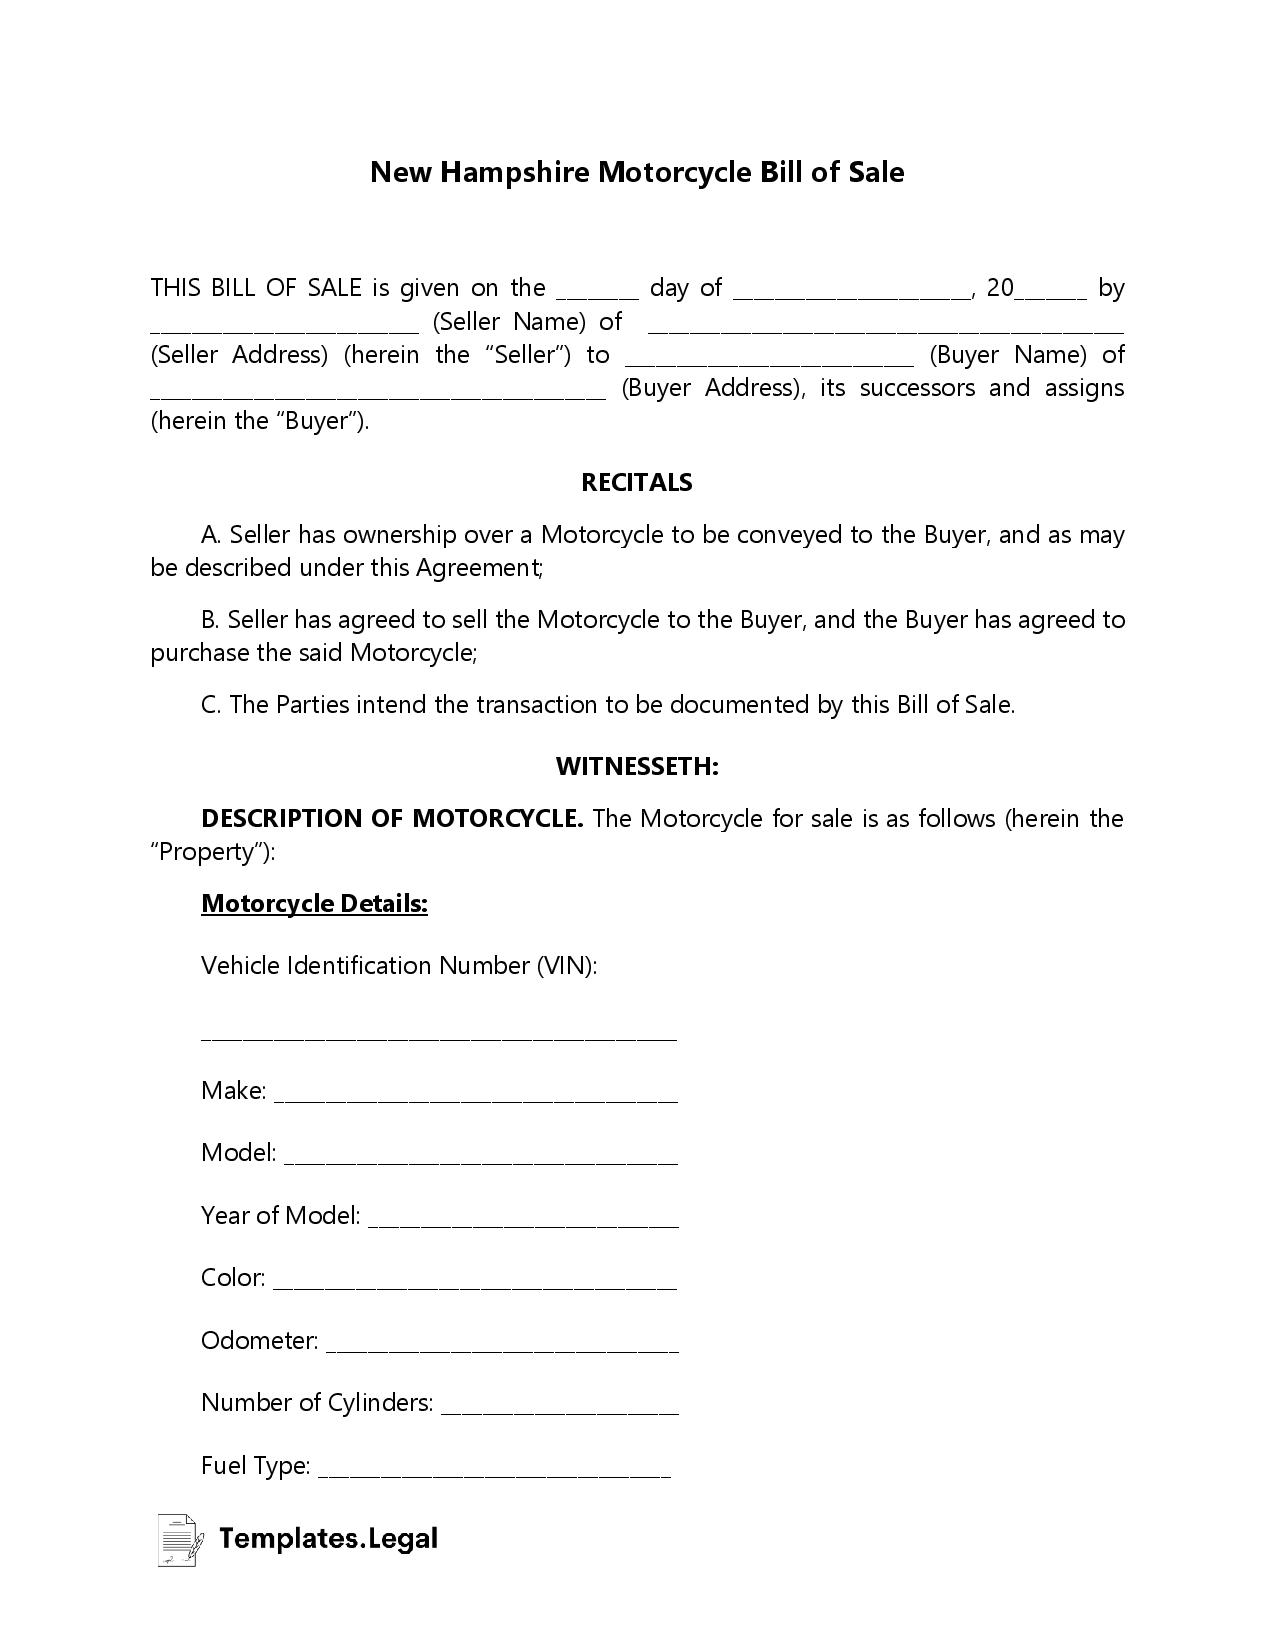 New Hampshire Motorcycle Bill of Sale - Templates.Legal